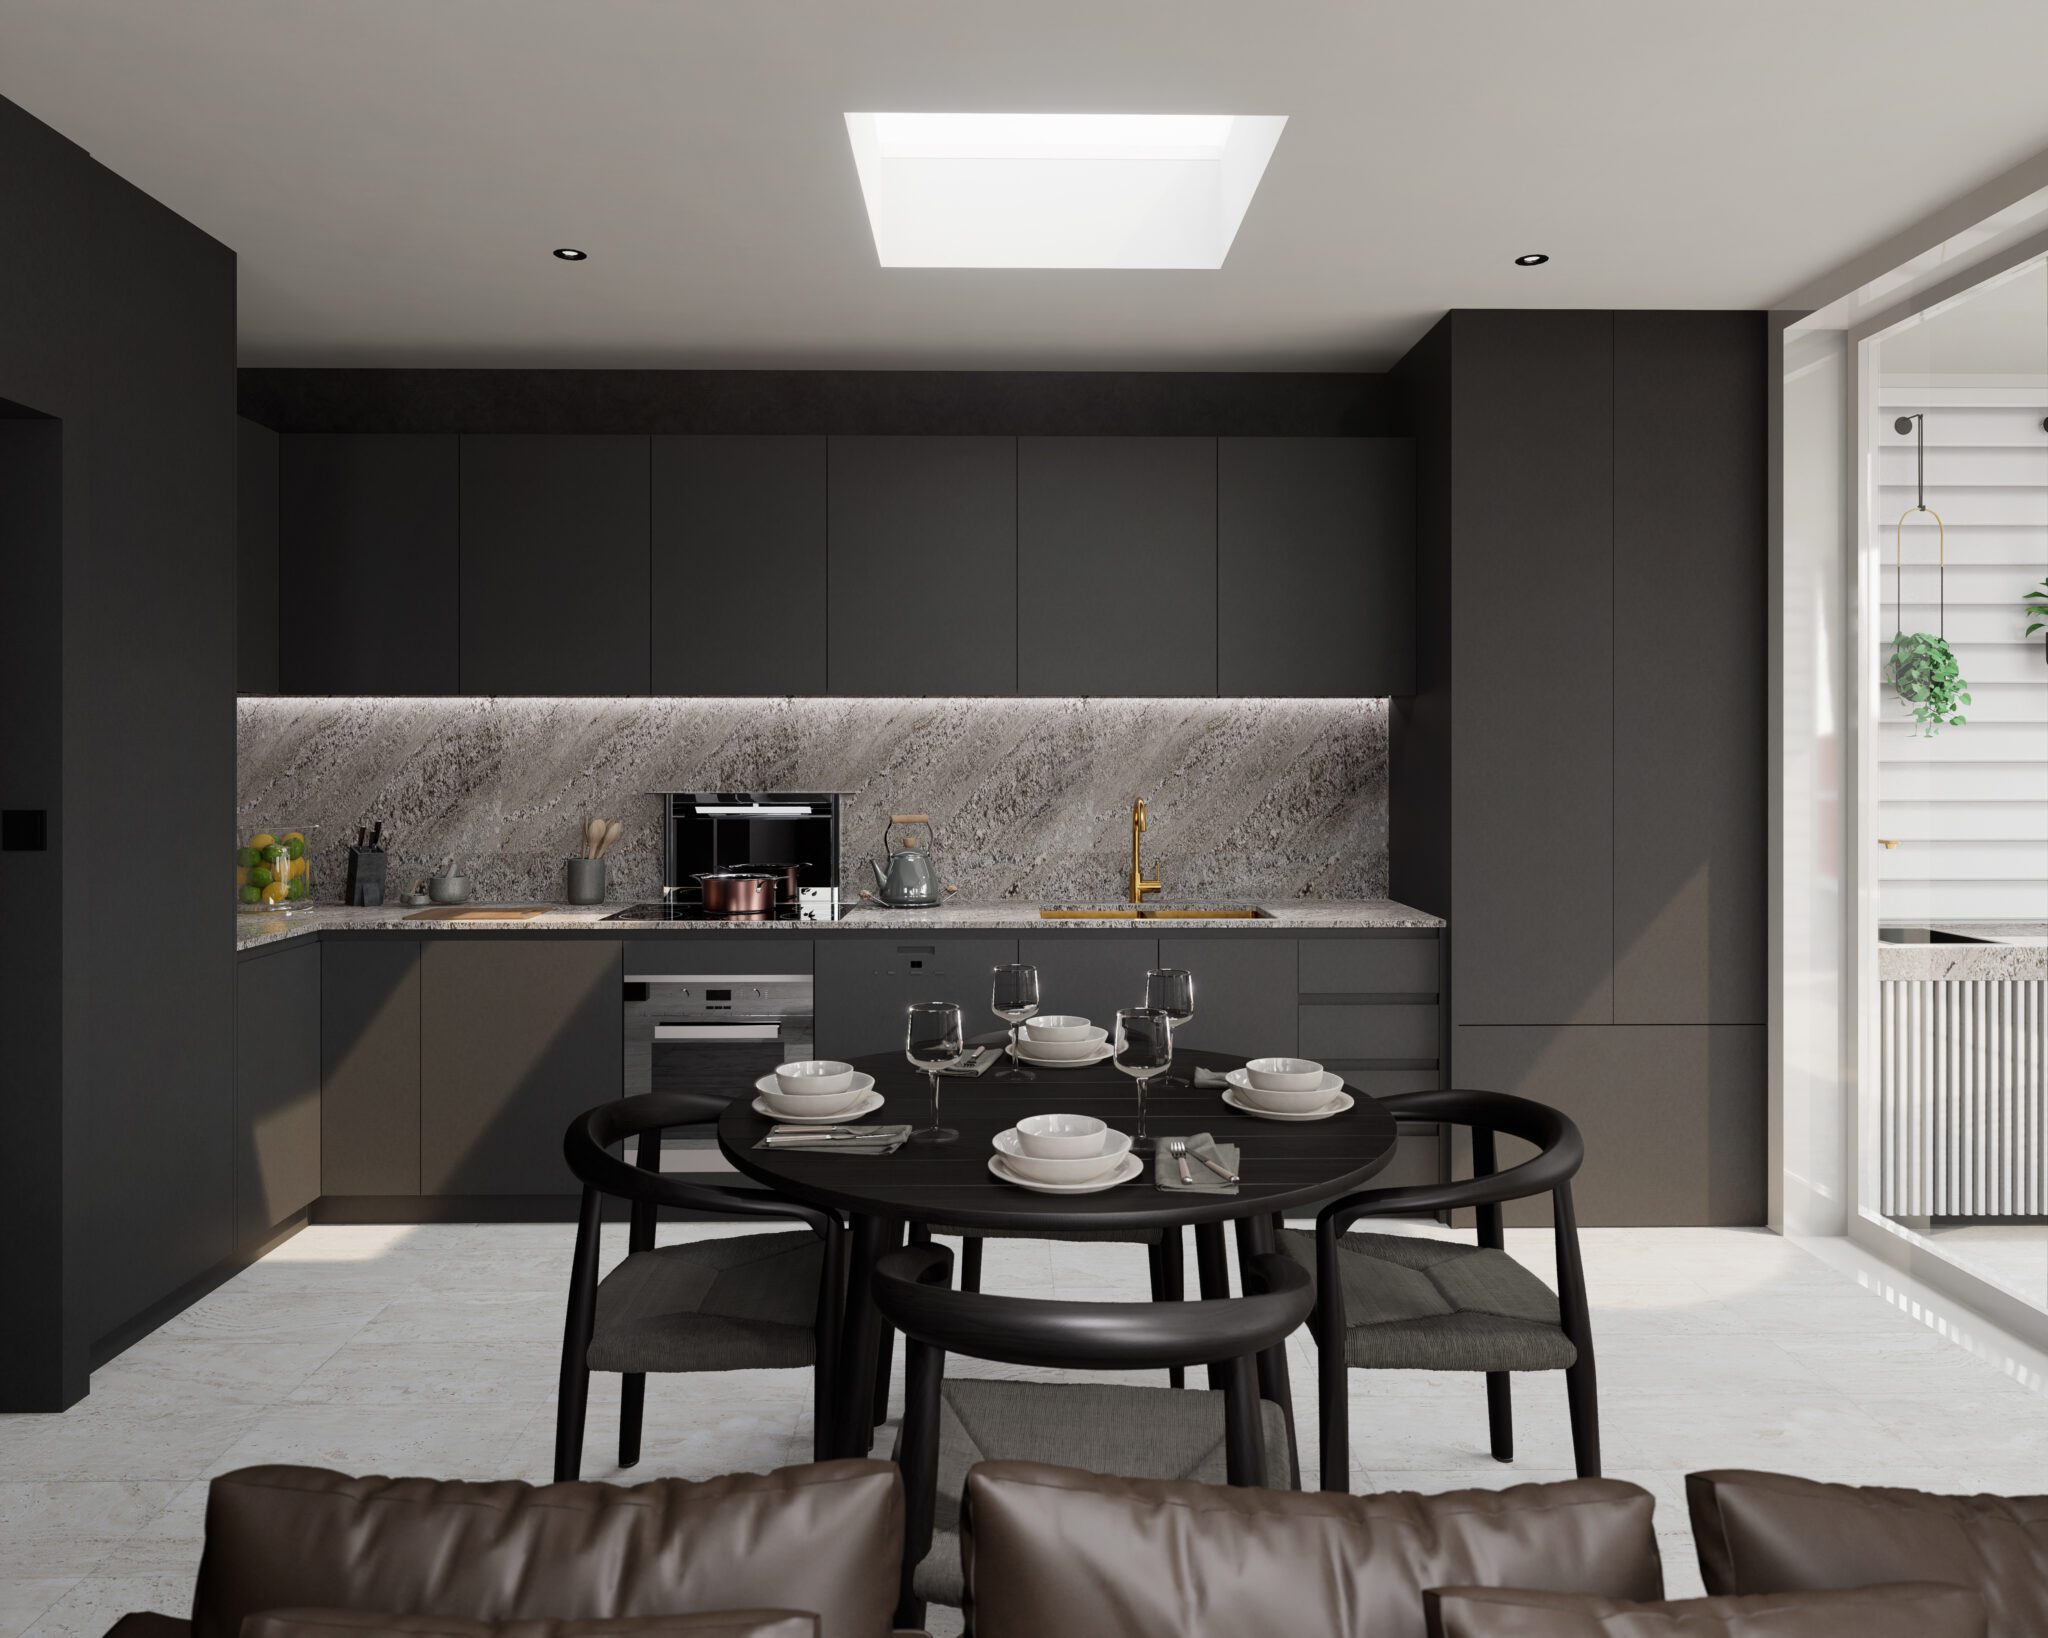 Secondary dwelling luxurious Kitchen and dining spaces.